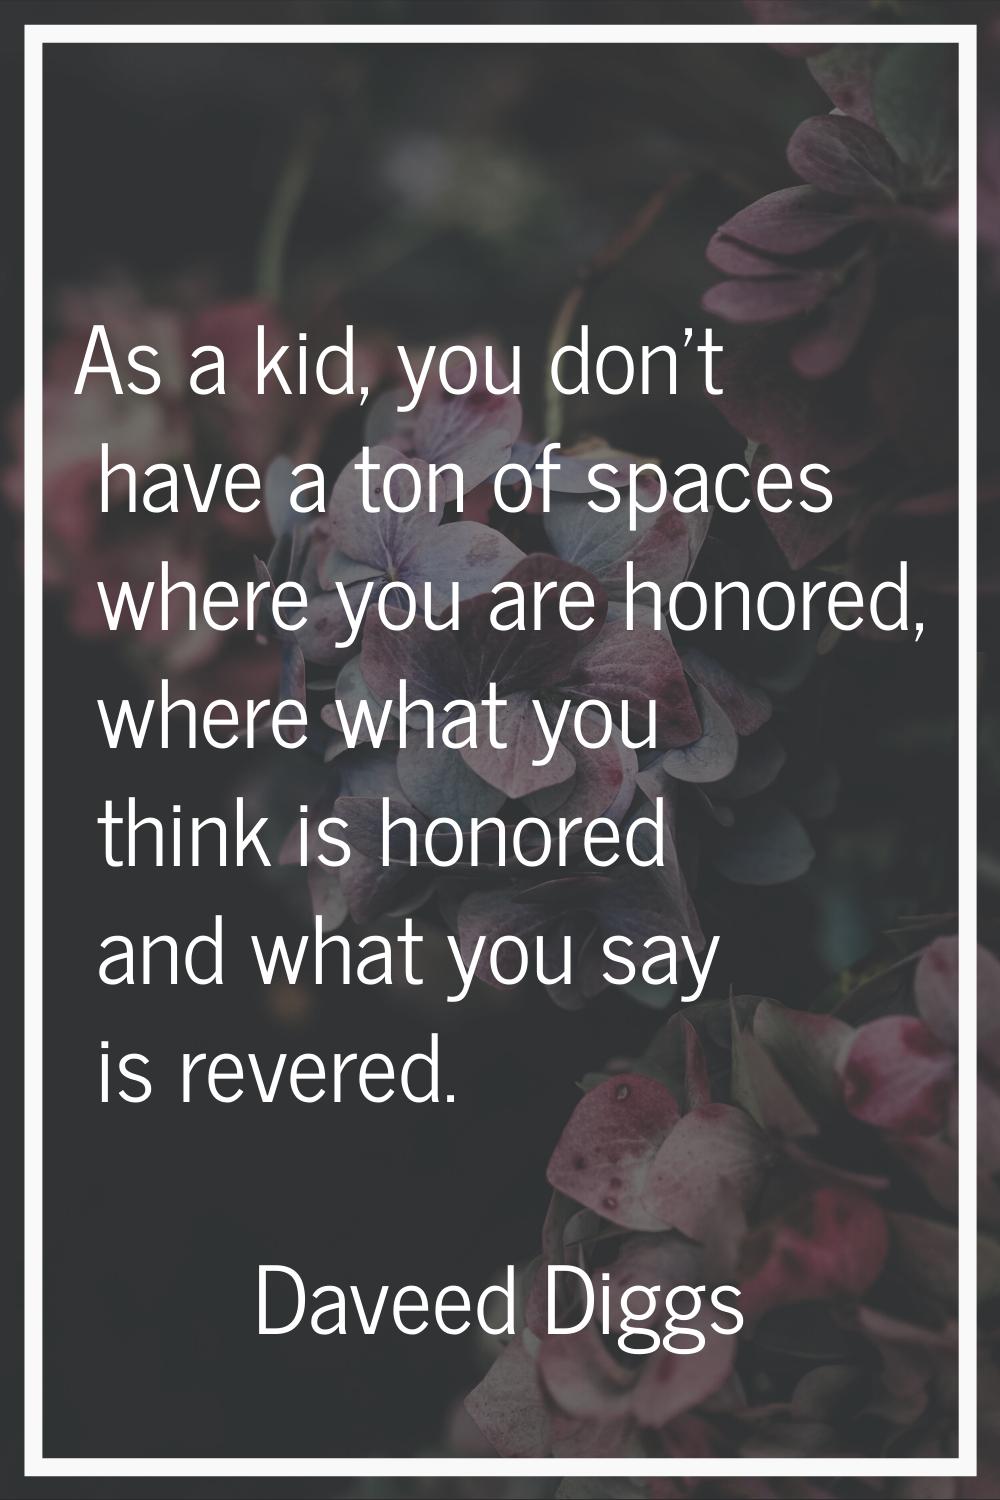 As a kid, you don't have a ton of spaces where you are honored, where what you think is honored and